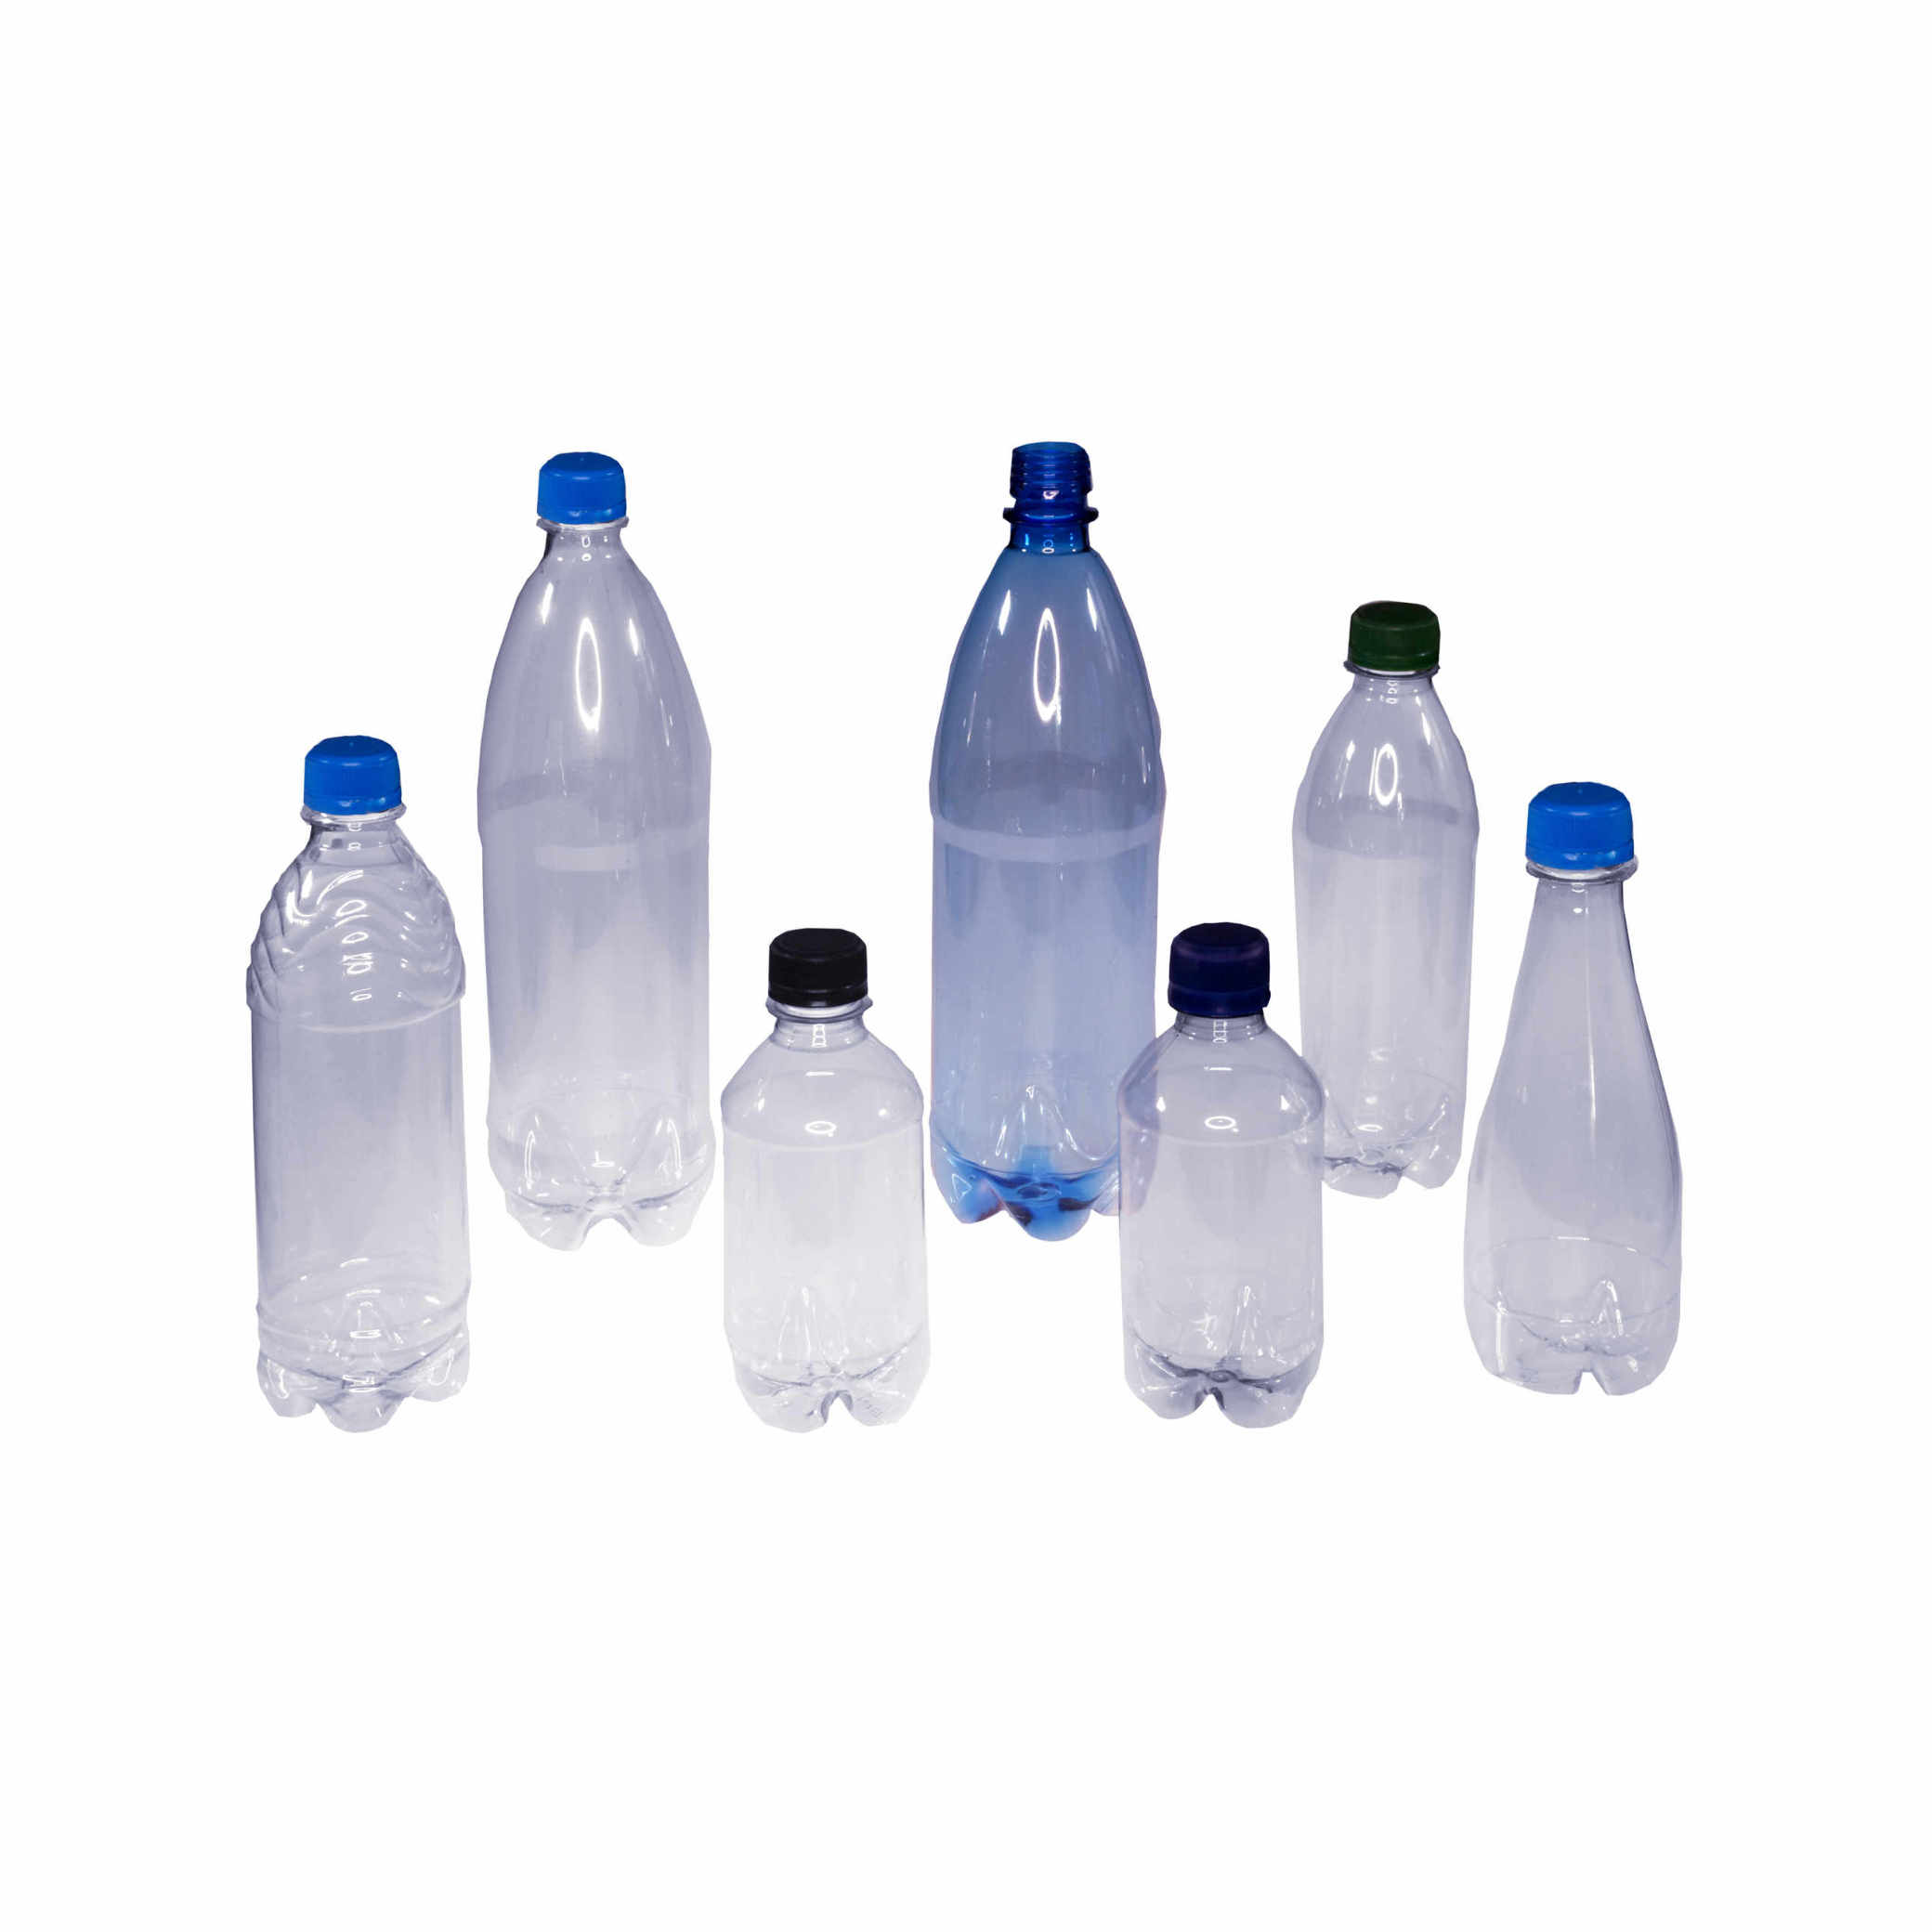 Why should you work with plastic bottle manufacturers directly